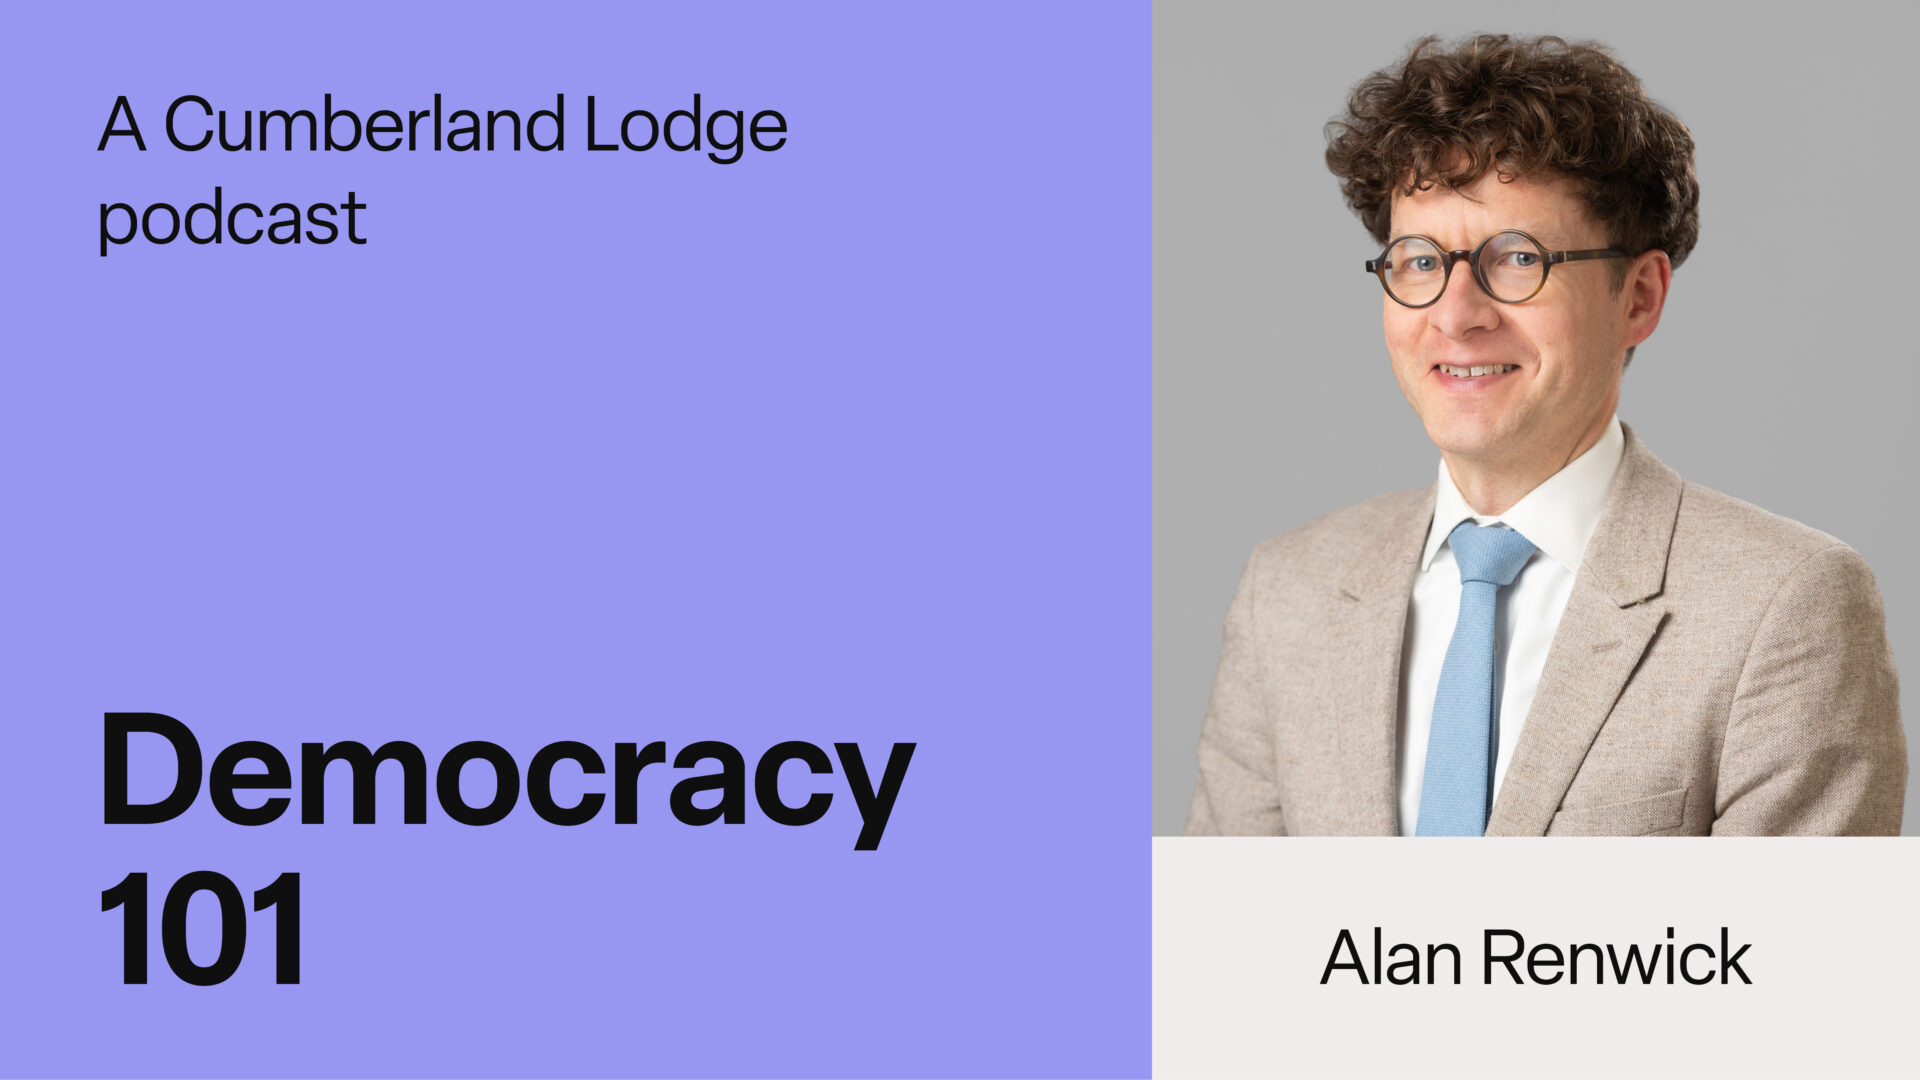 Democracy 101 - What is Democracy with Alan Renwick